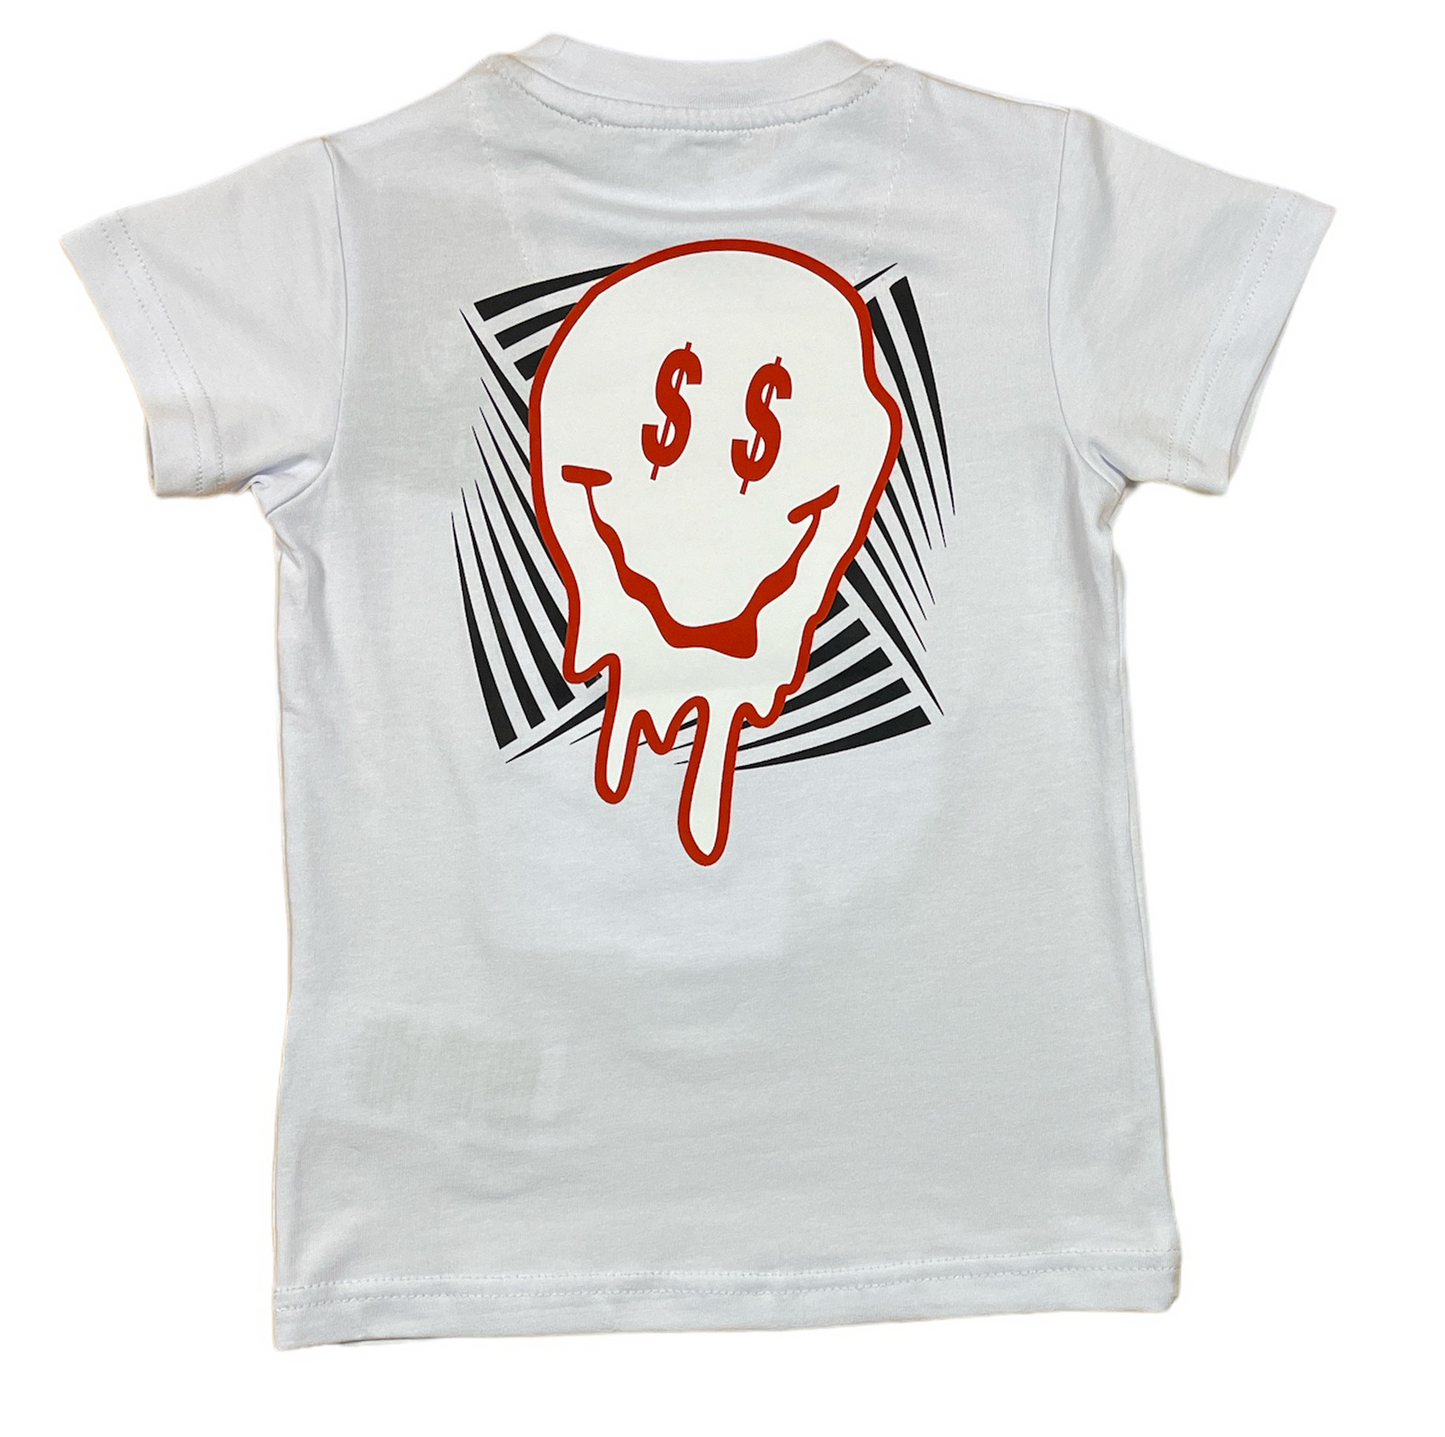 ALL HUSTLE KIDS TEE (WHITE AND RED )